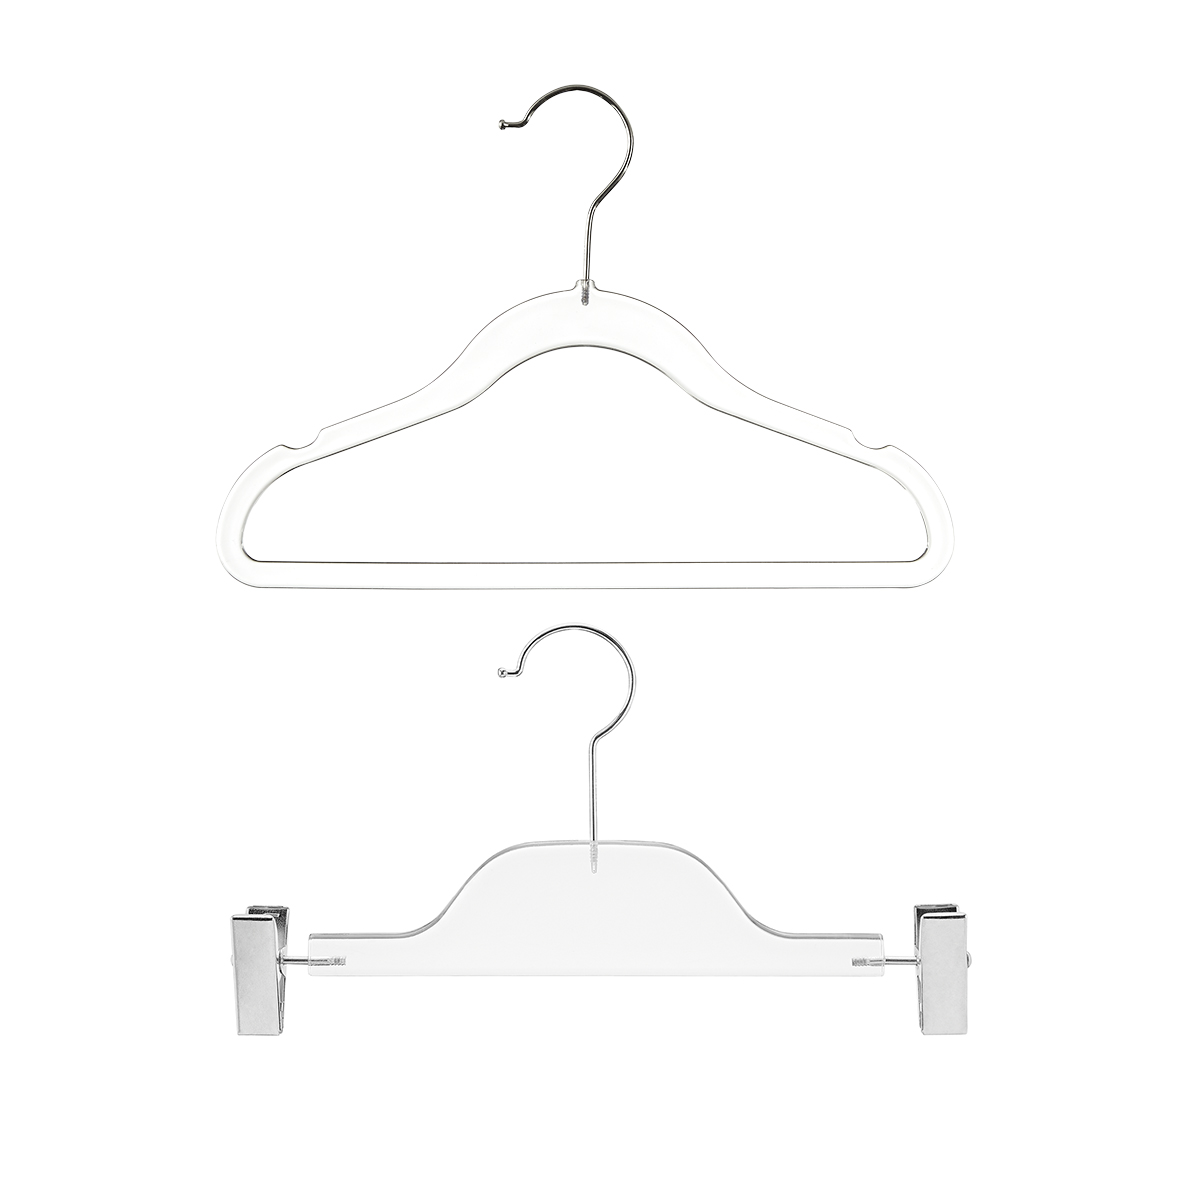 https://www.containerstore.com/catalogimages/420802/10078152_kids_clear_slim_hanger_10_p.jpg